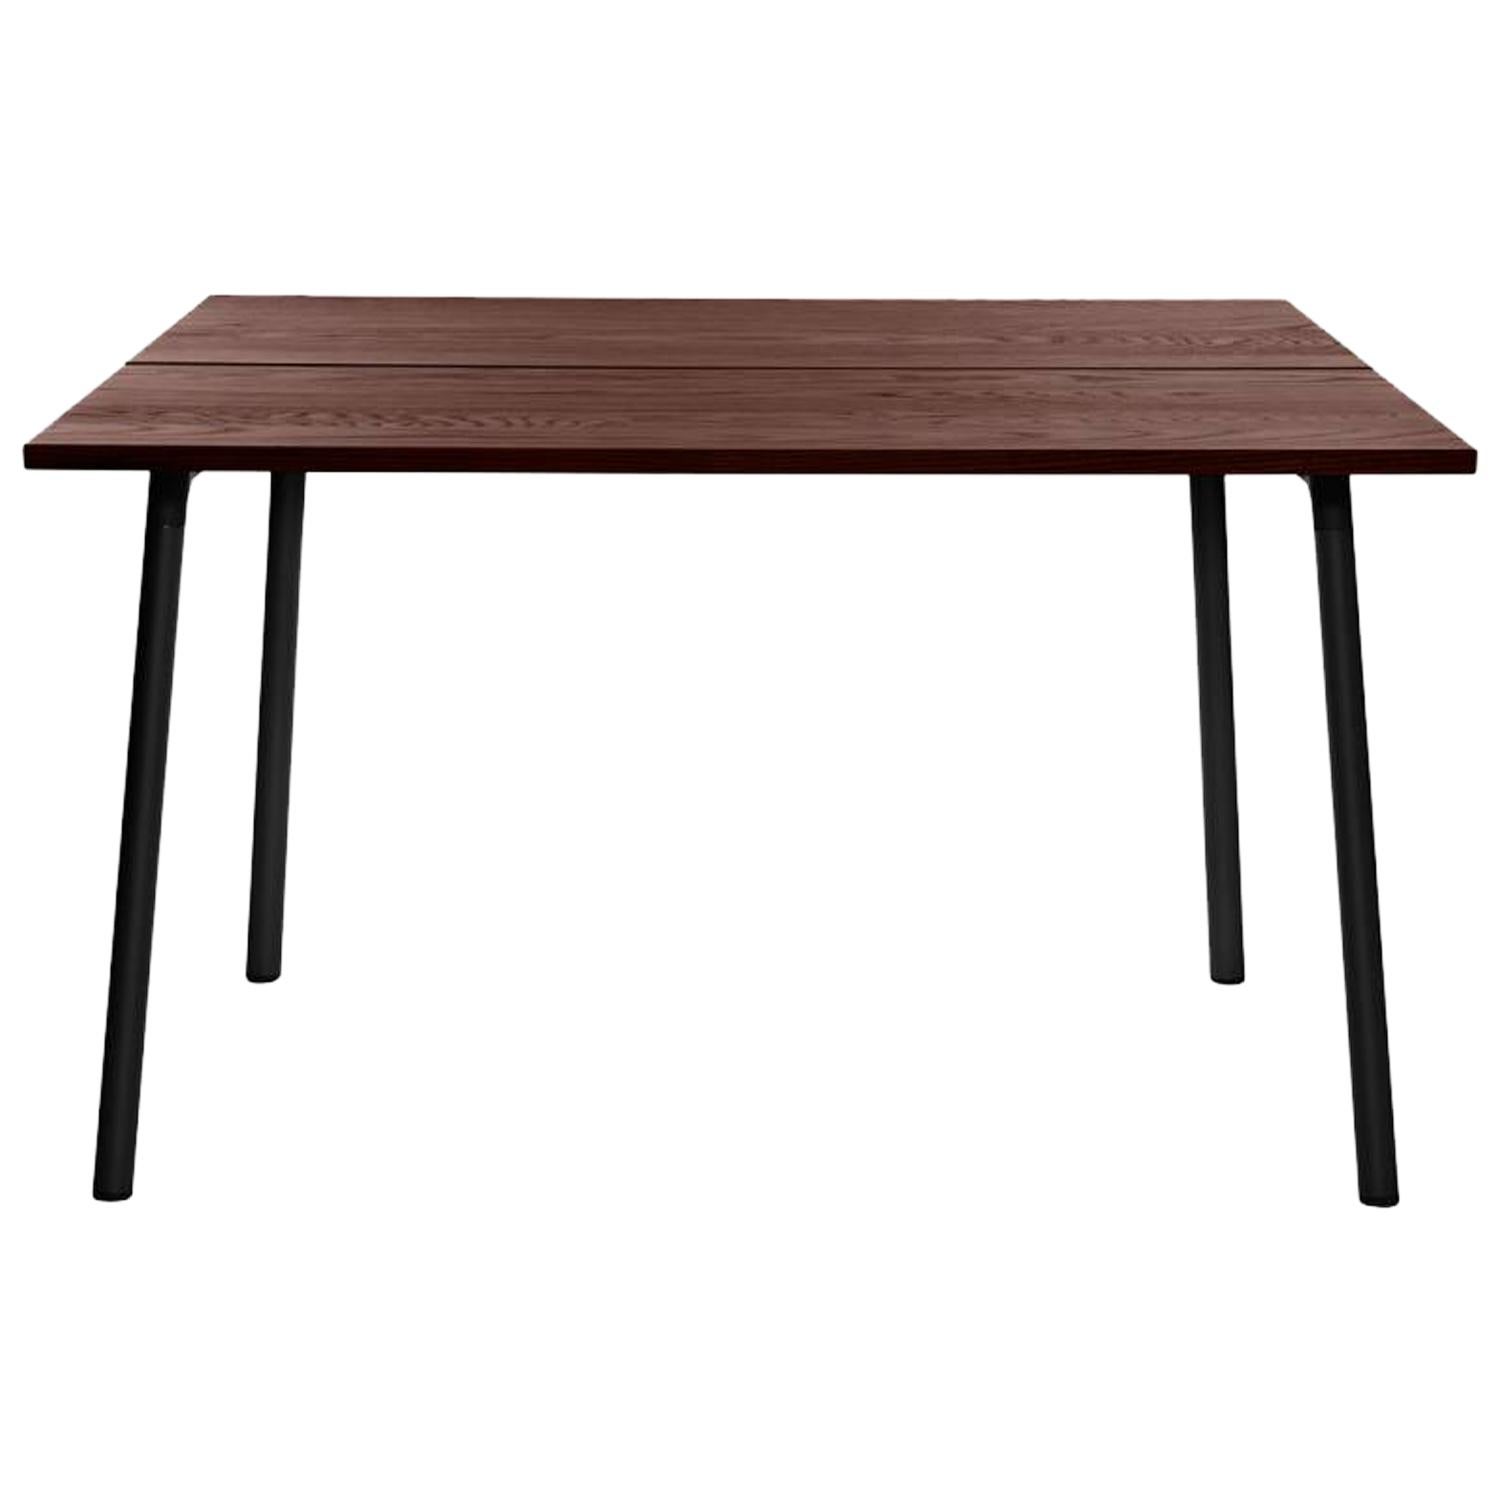 Emeco Run Medium Table in Black Powder-Coat and Walnut by Sam Hecht & Kim Colin For Sale